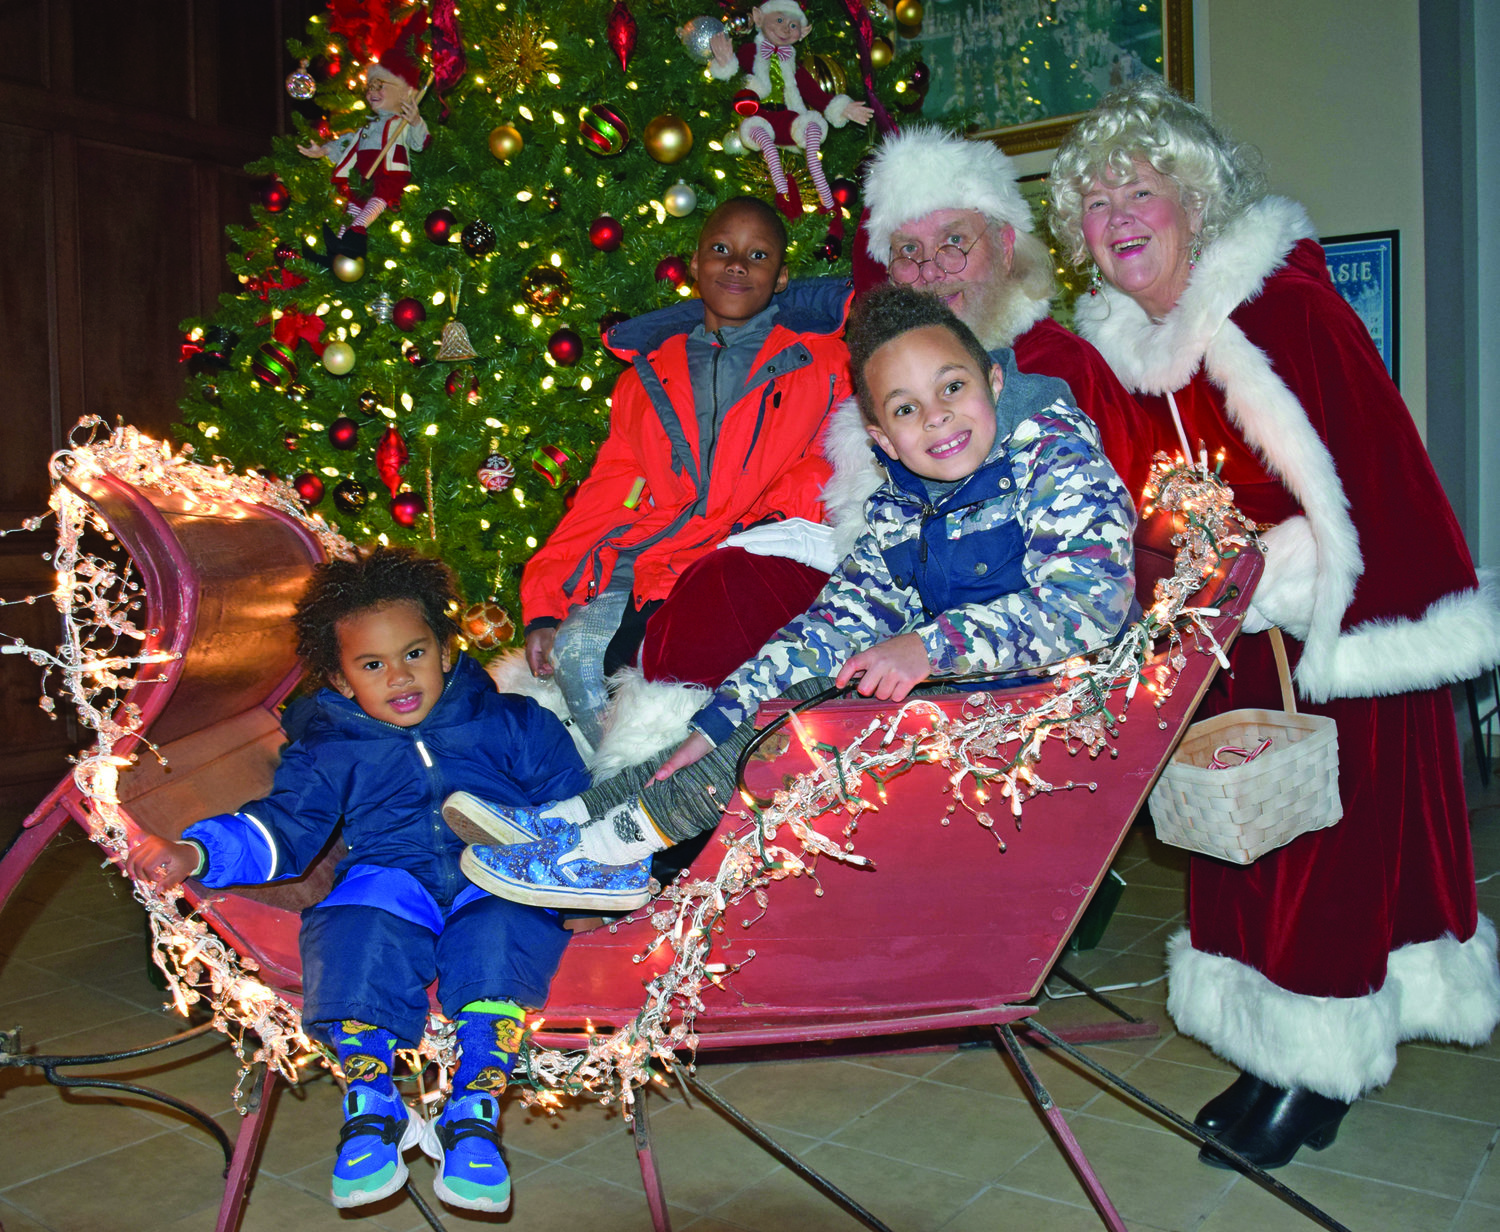 Kingston, 2, Arian 6, and Tyrese Smikle, 10, of Perkasie with Santa and Mrs. Claus.